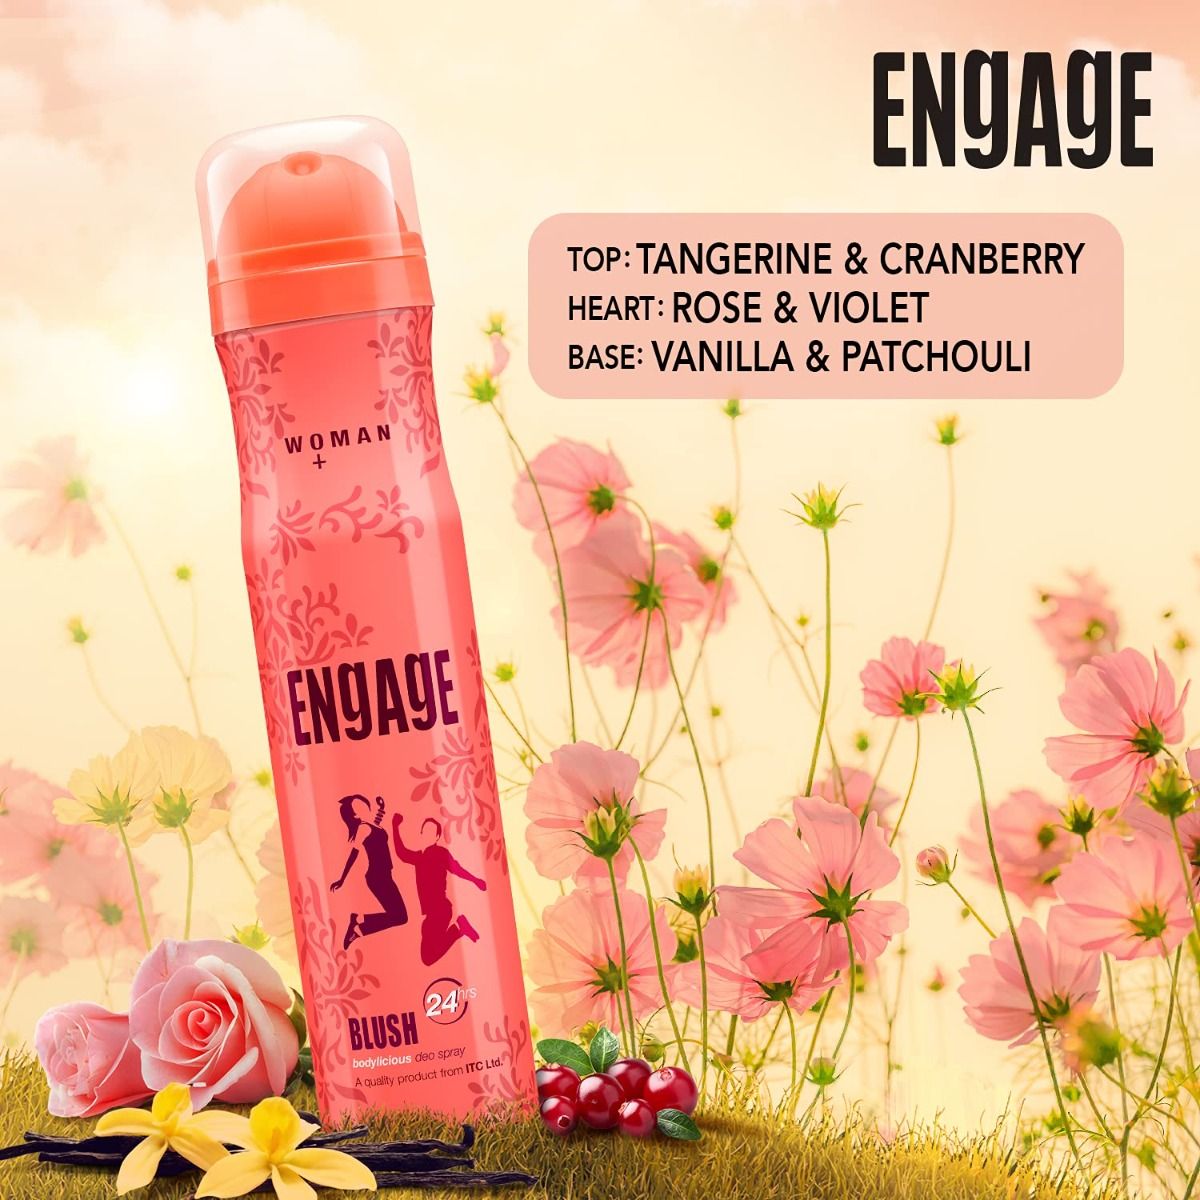 Engage Blush Deodorant for Women, 150 ml, Pack of 1 